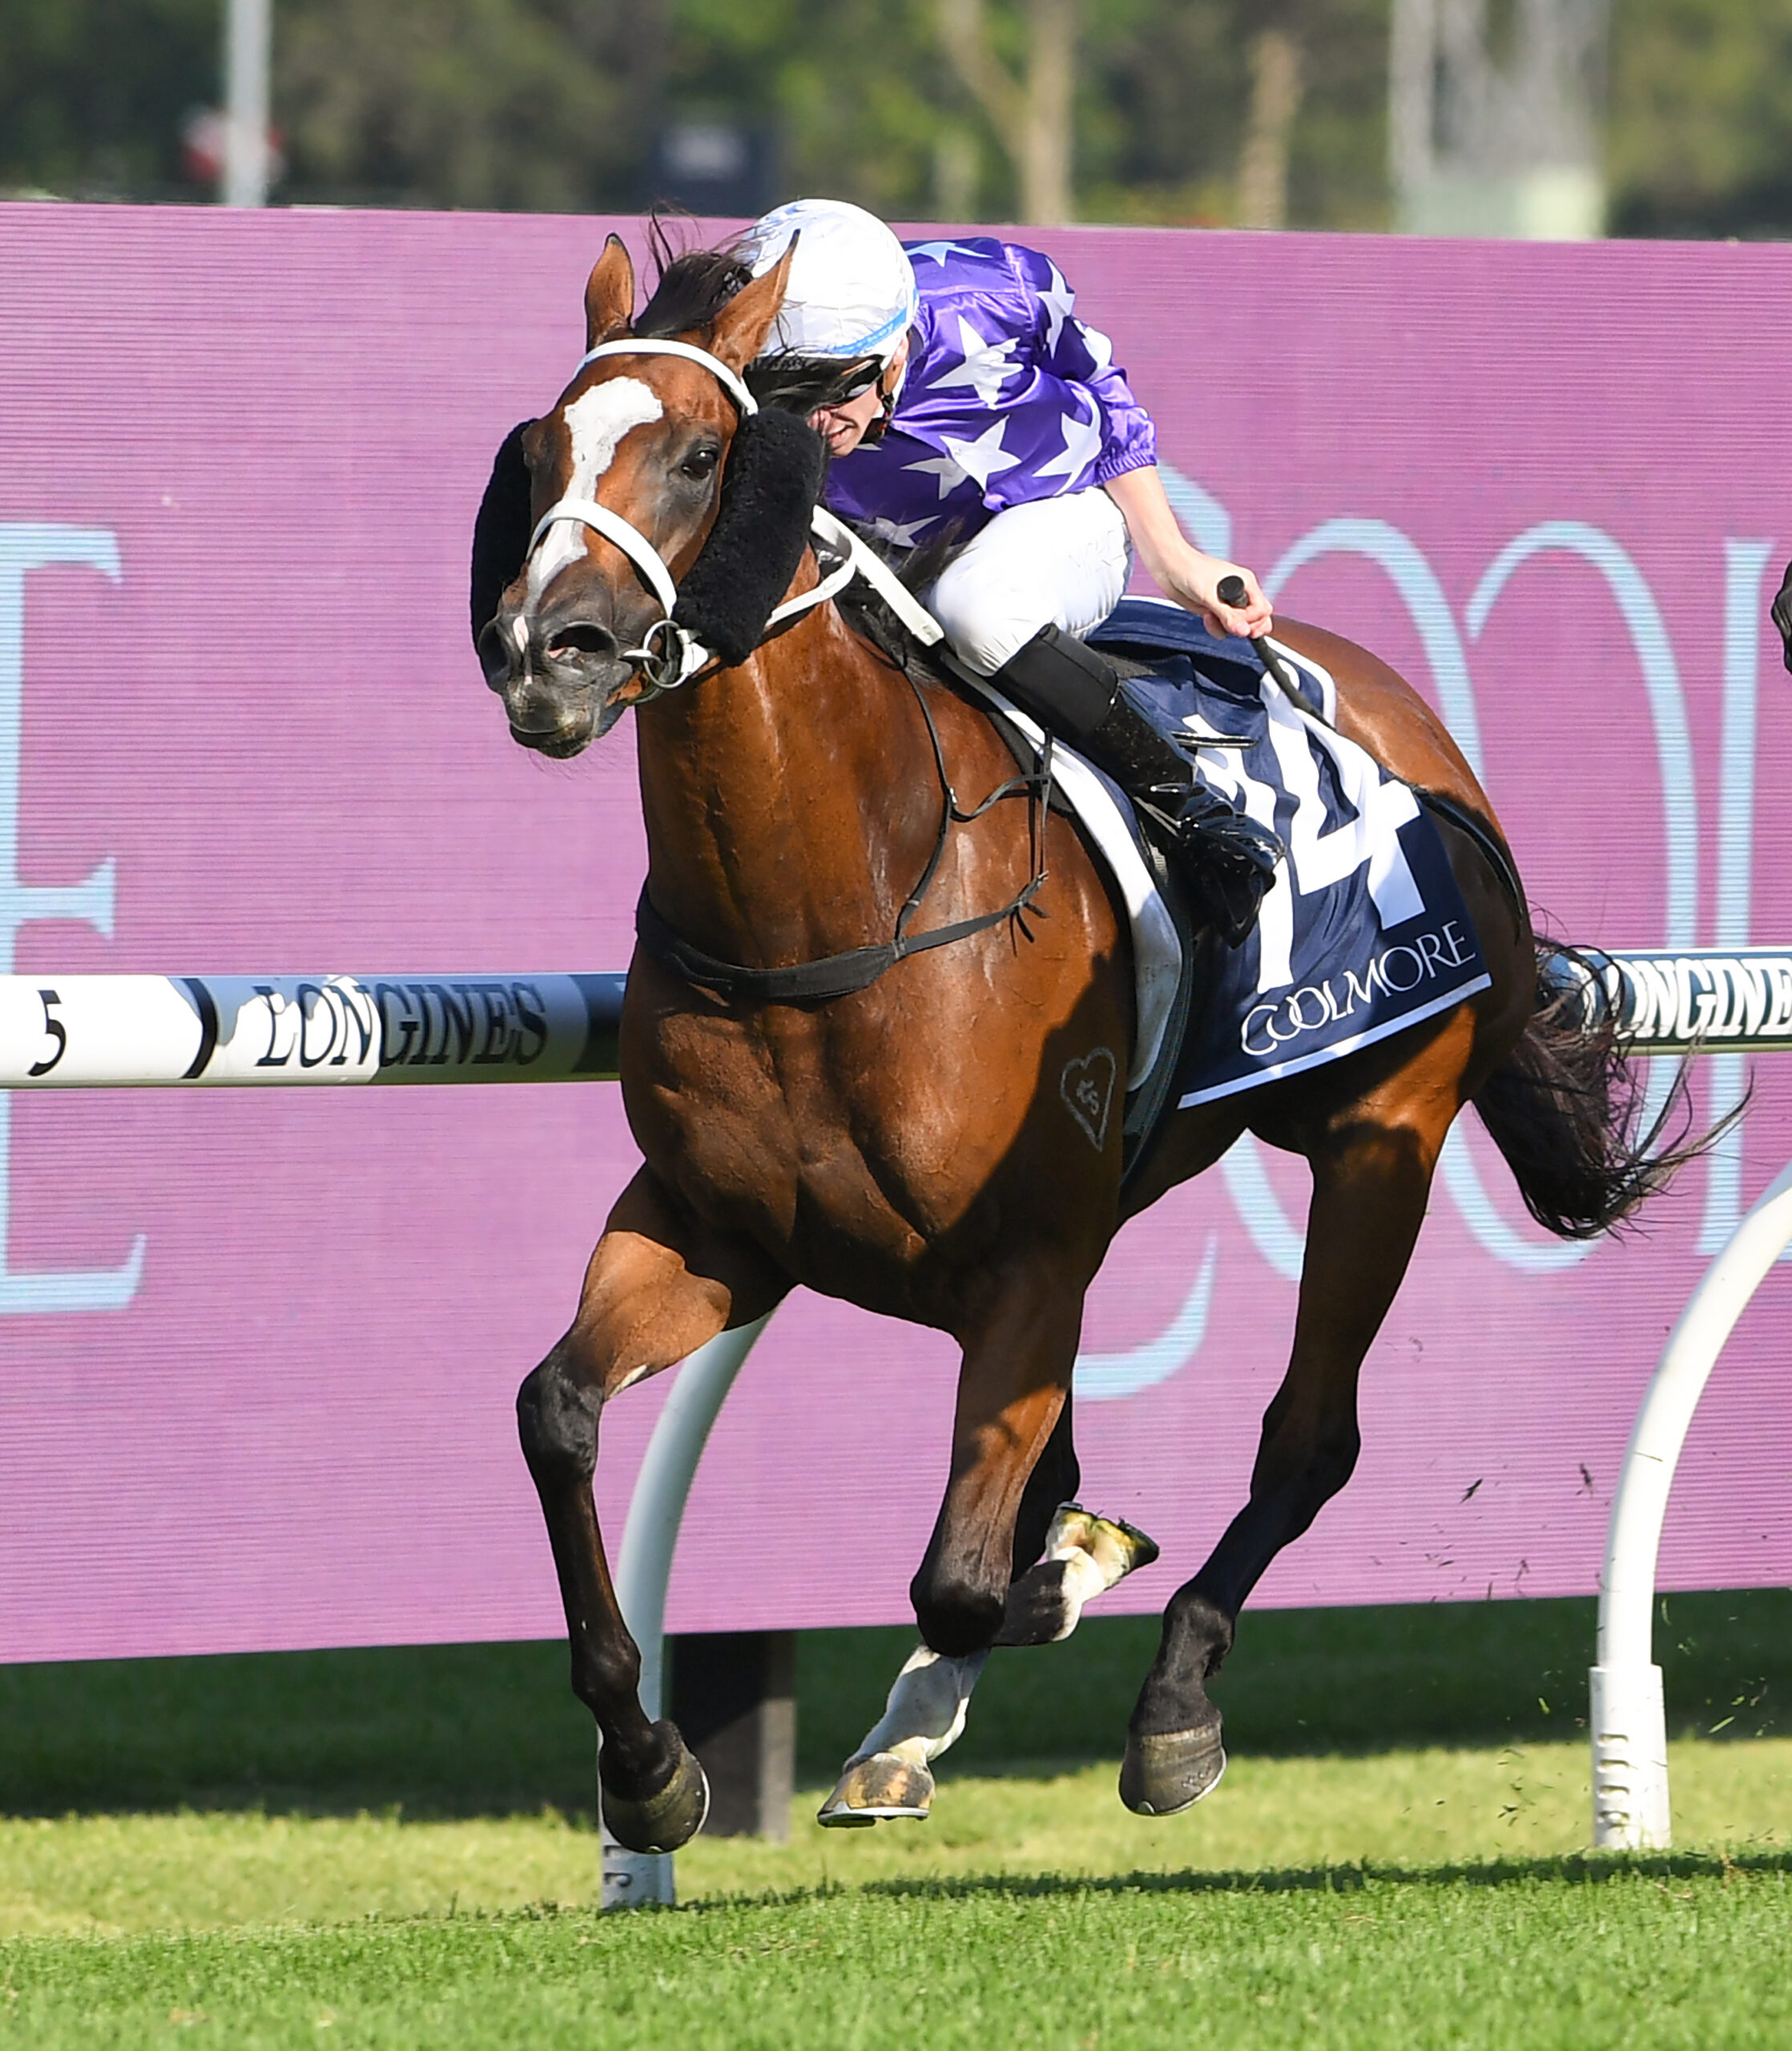 ESPIONA - WINNER OF THE GROUP 1 COOLMORE CLASSIC, GROUP 2 GOLDEN PENDANT & 2-TIME GROUP 3 & LISTED WINNER